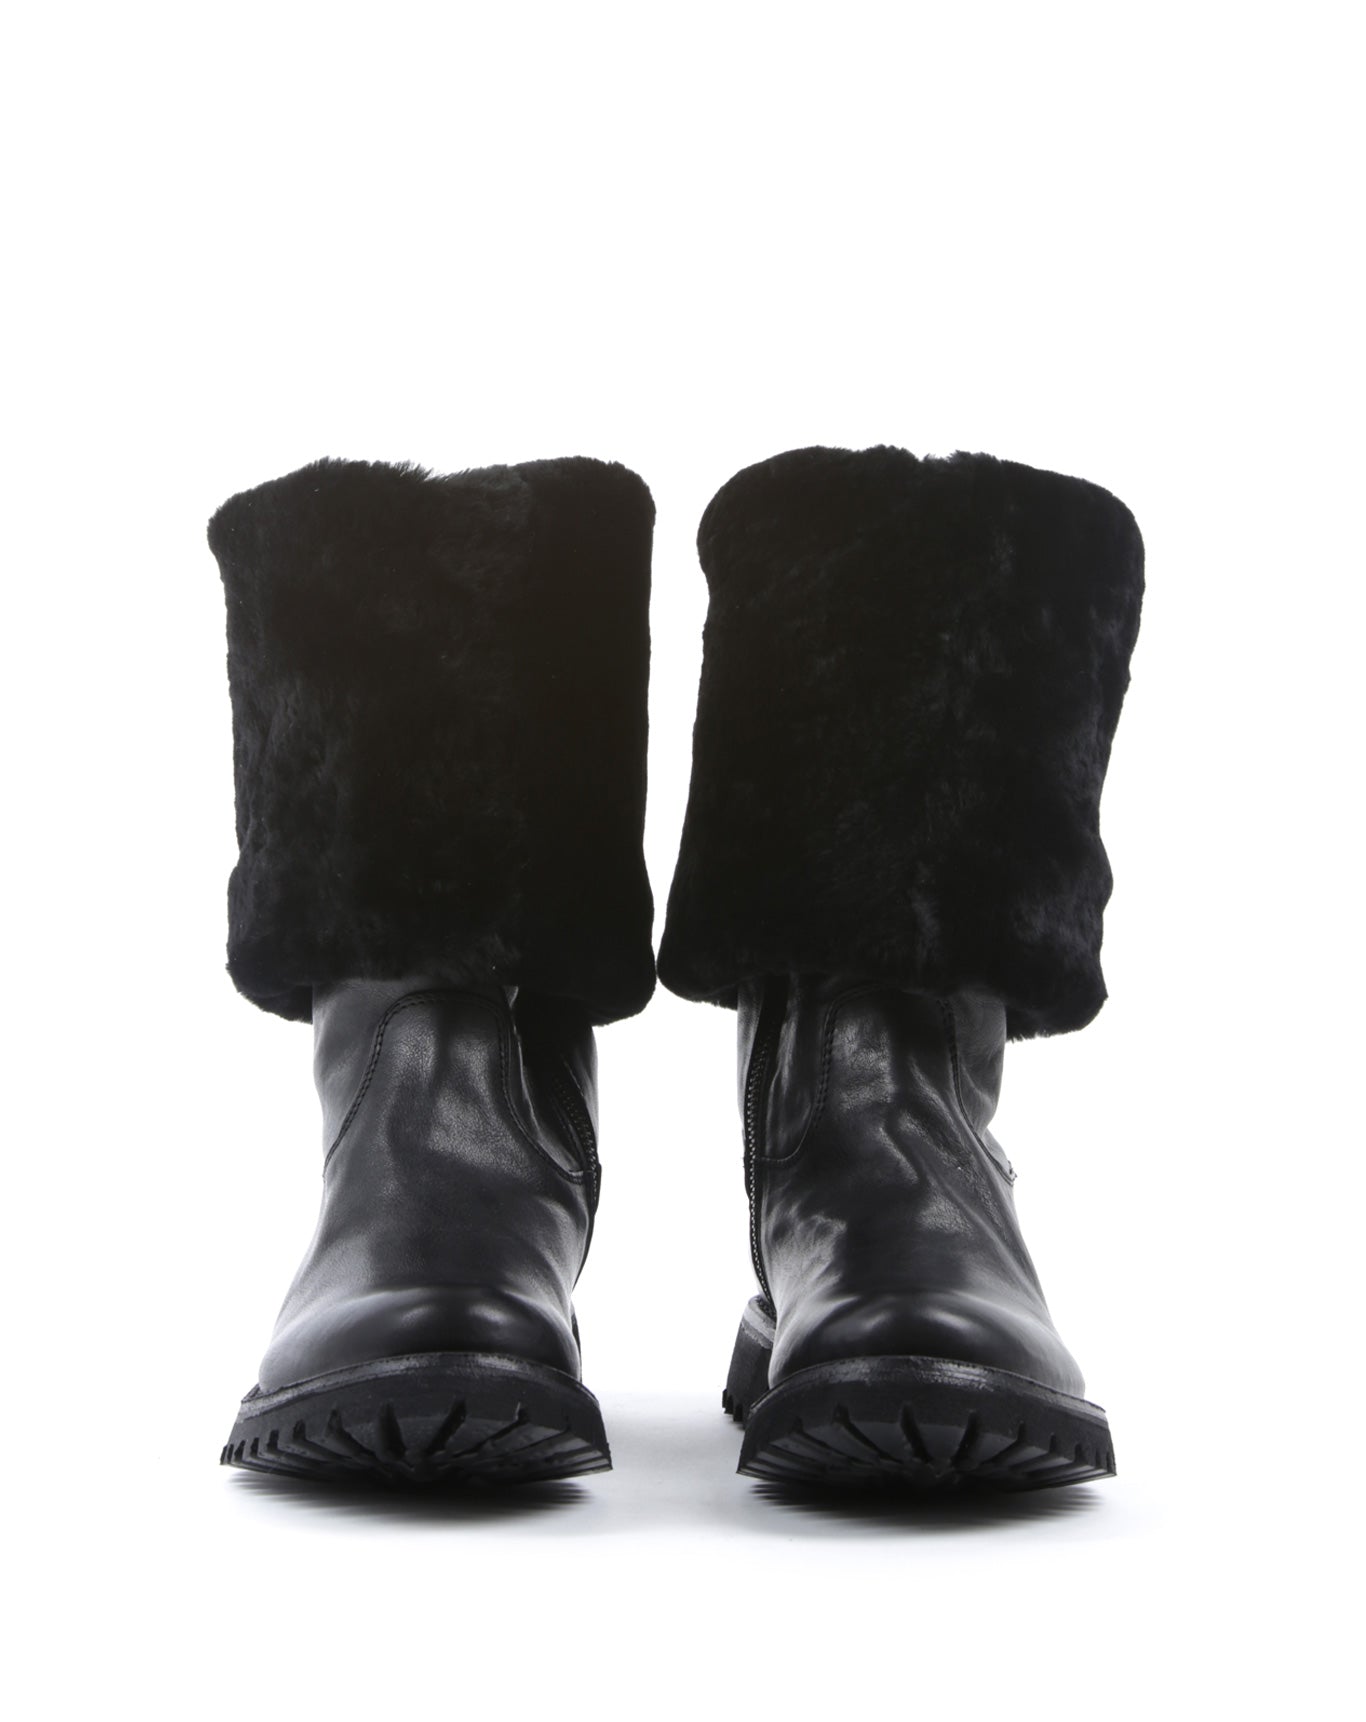 FIORENTINI+BAKER, ETERNITY MASSIVE-M-ELLMO,These seriously stylish shearling lined boots will ensure warmth and comfort in the colder months. Fold down for added versatility. Handcrafted by skilled artisans. Made in Italy. Made to last.